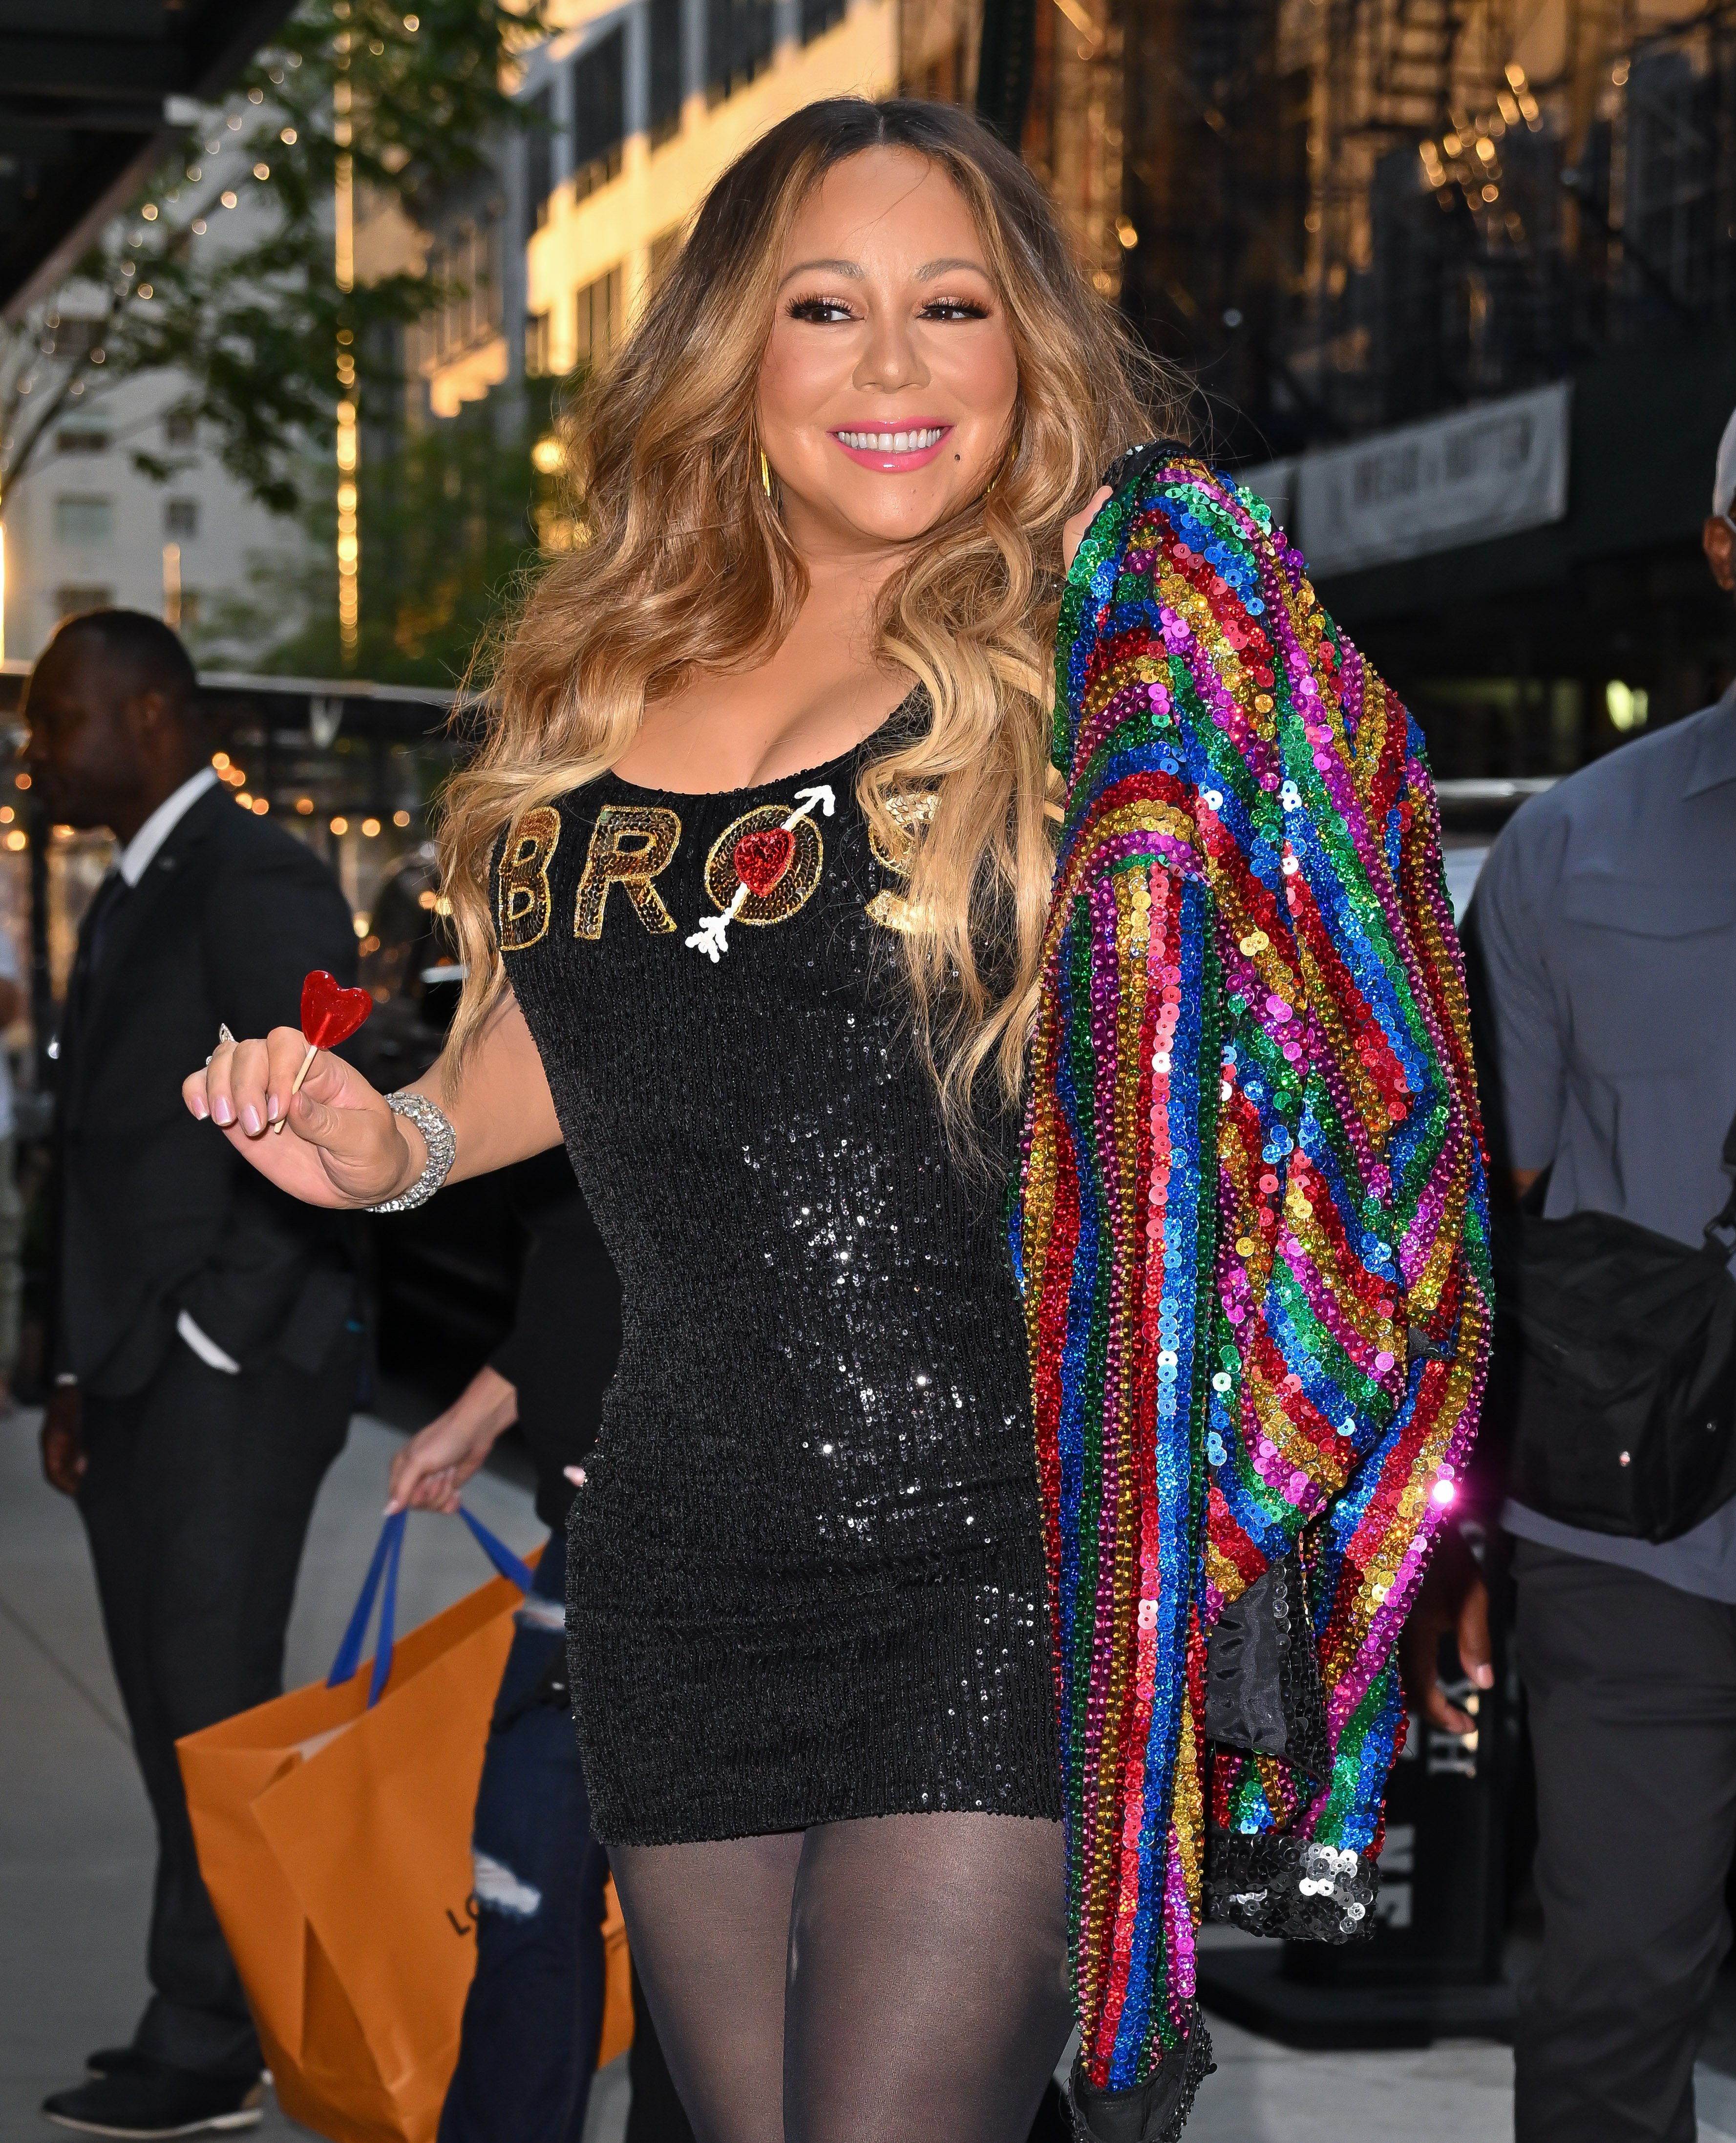 Mariah Carey arrives to the "Bros" screening at The Whitby Hotel on June 20, 2022 in New York City. | Source: Getty Images